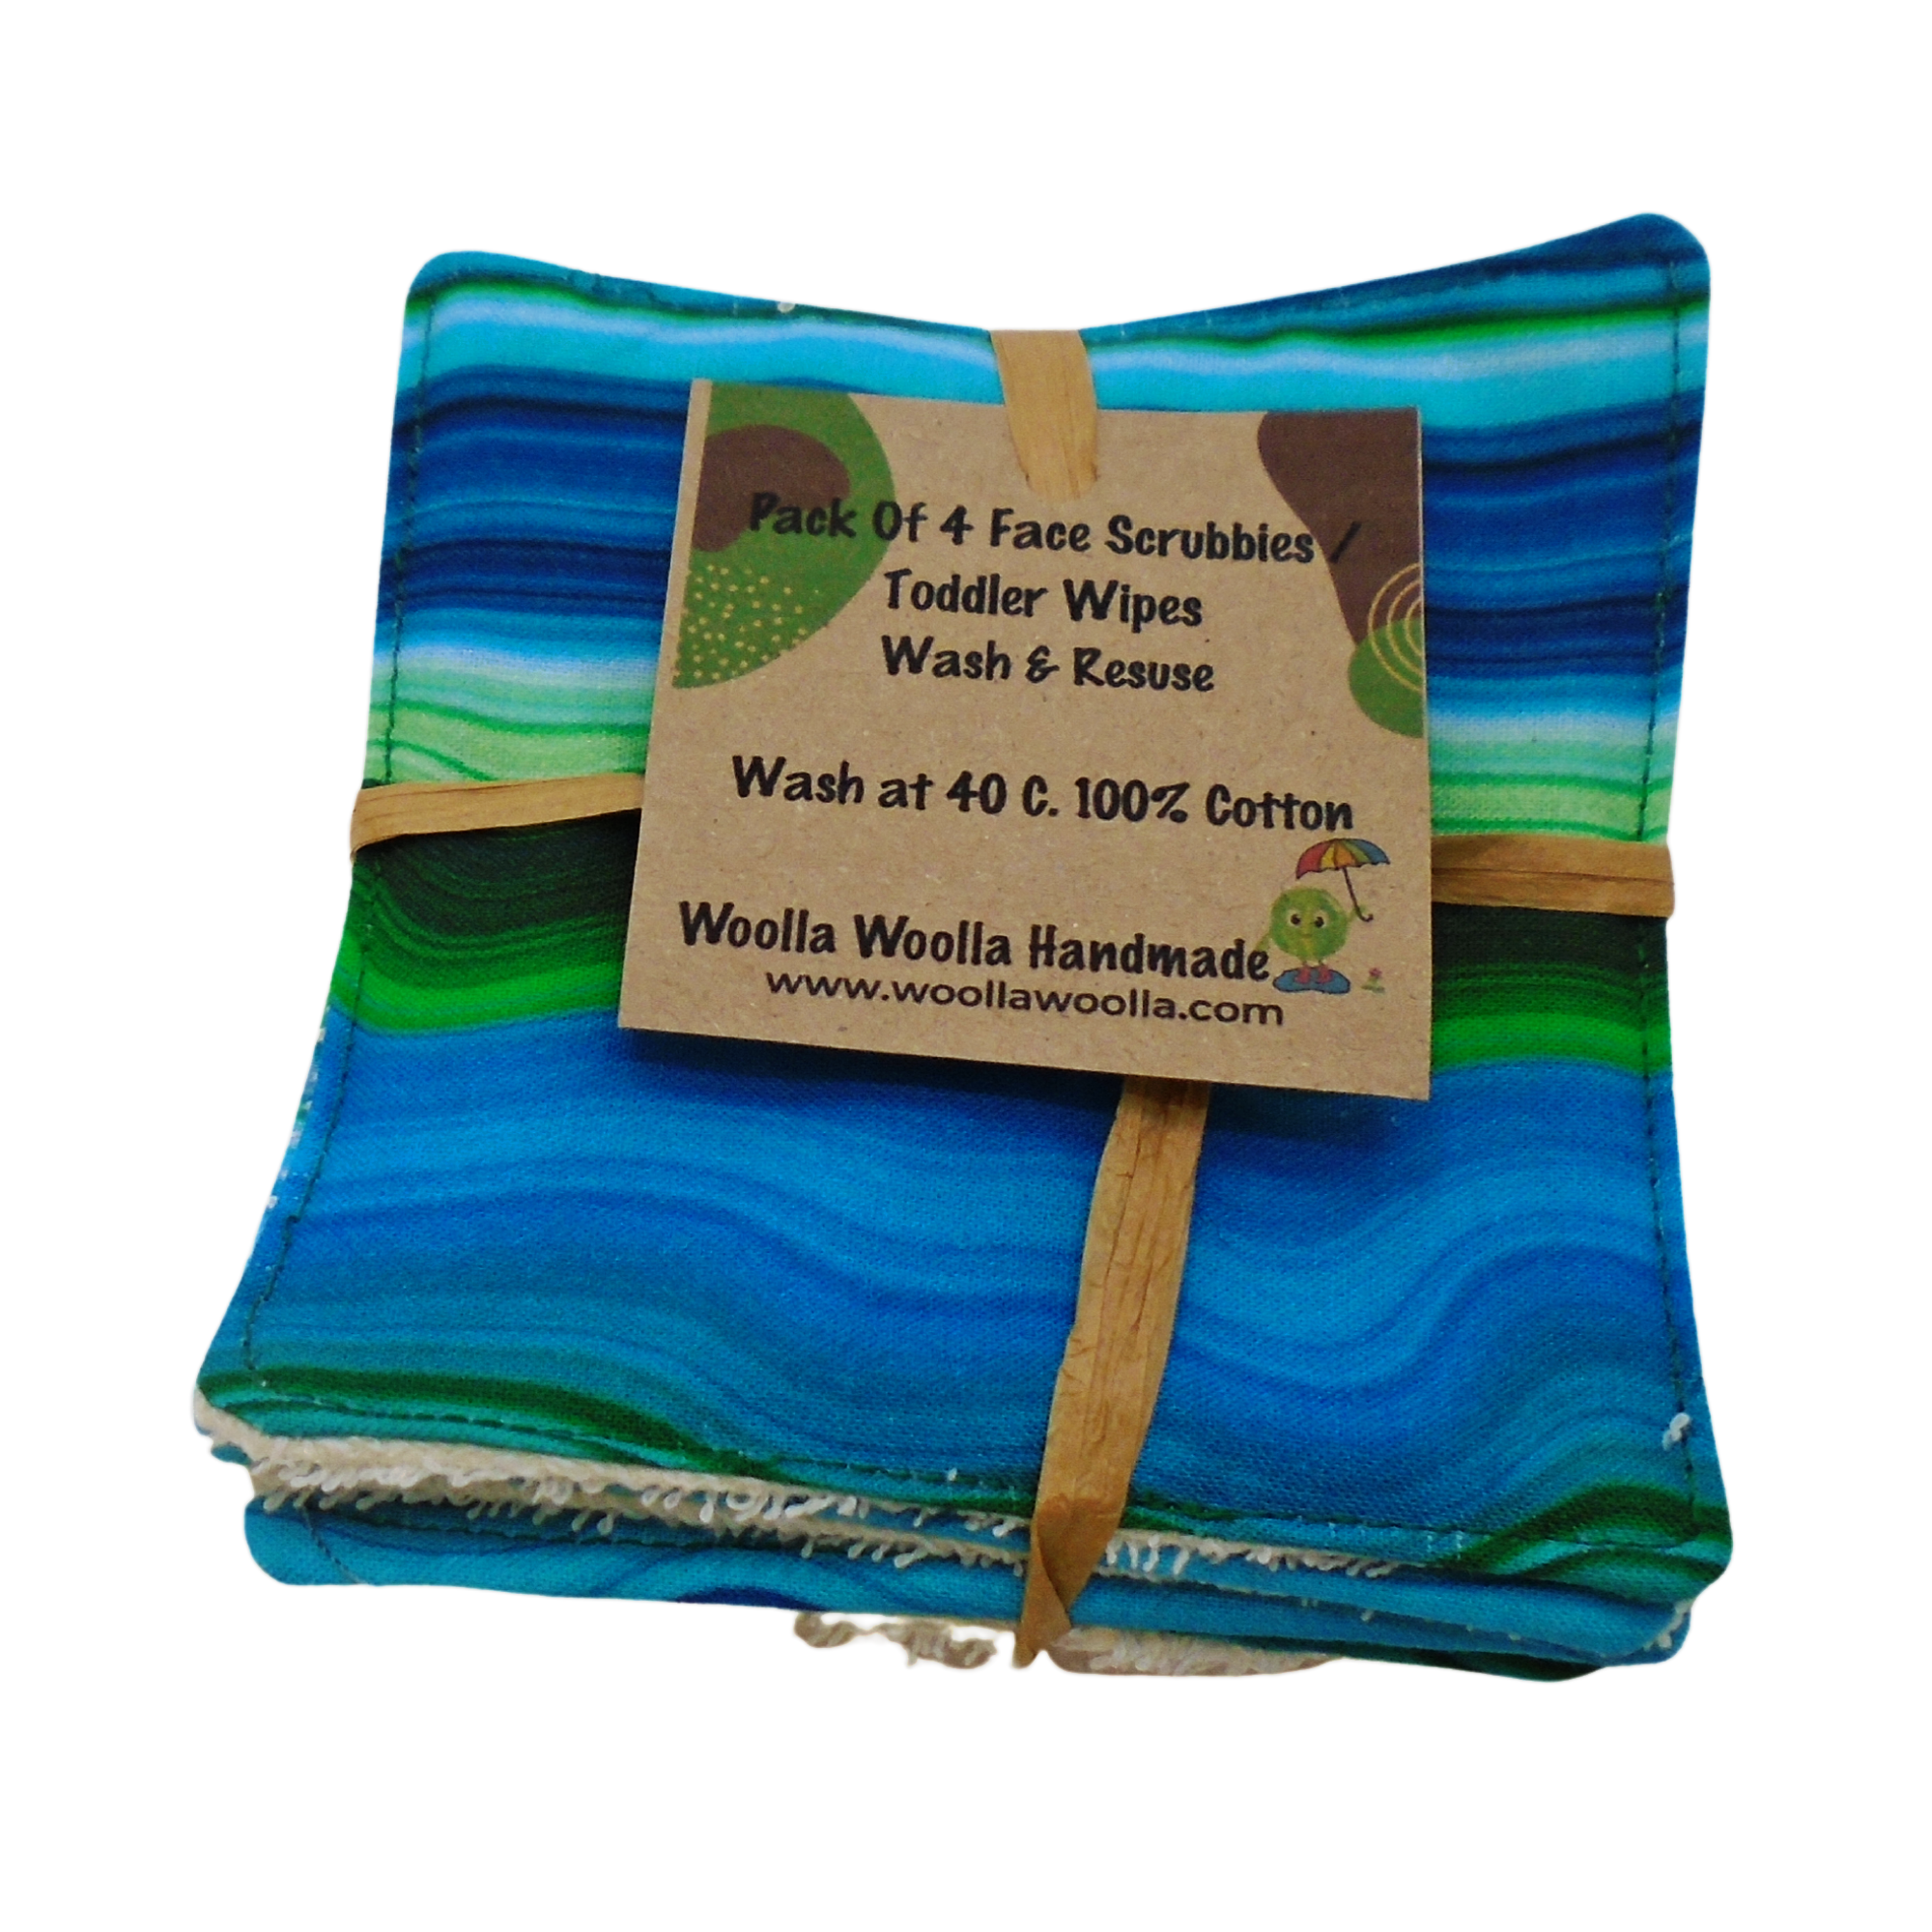 Reusable Cotton Wipes 4 Pack - Make Up - Toddler - Finger Wipes - Blue Green Geode With Cream Towelling